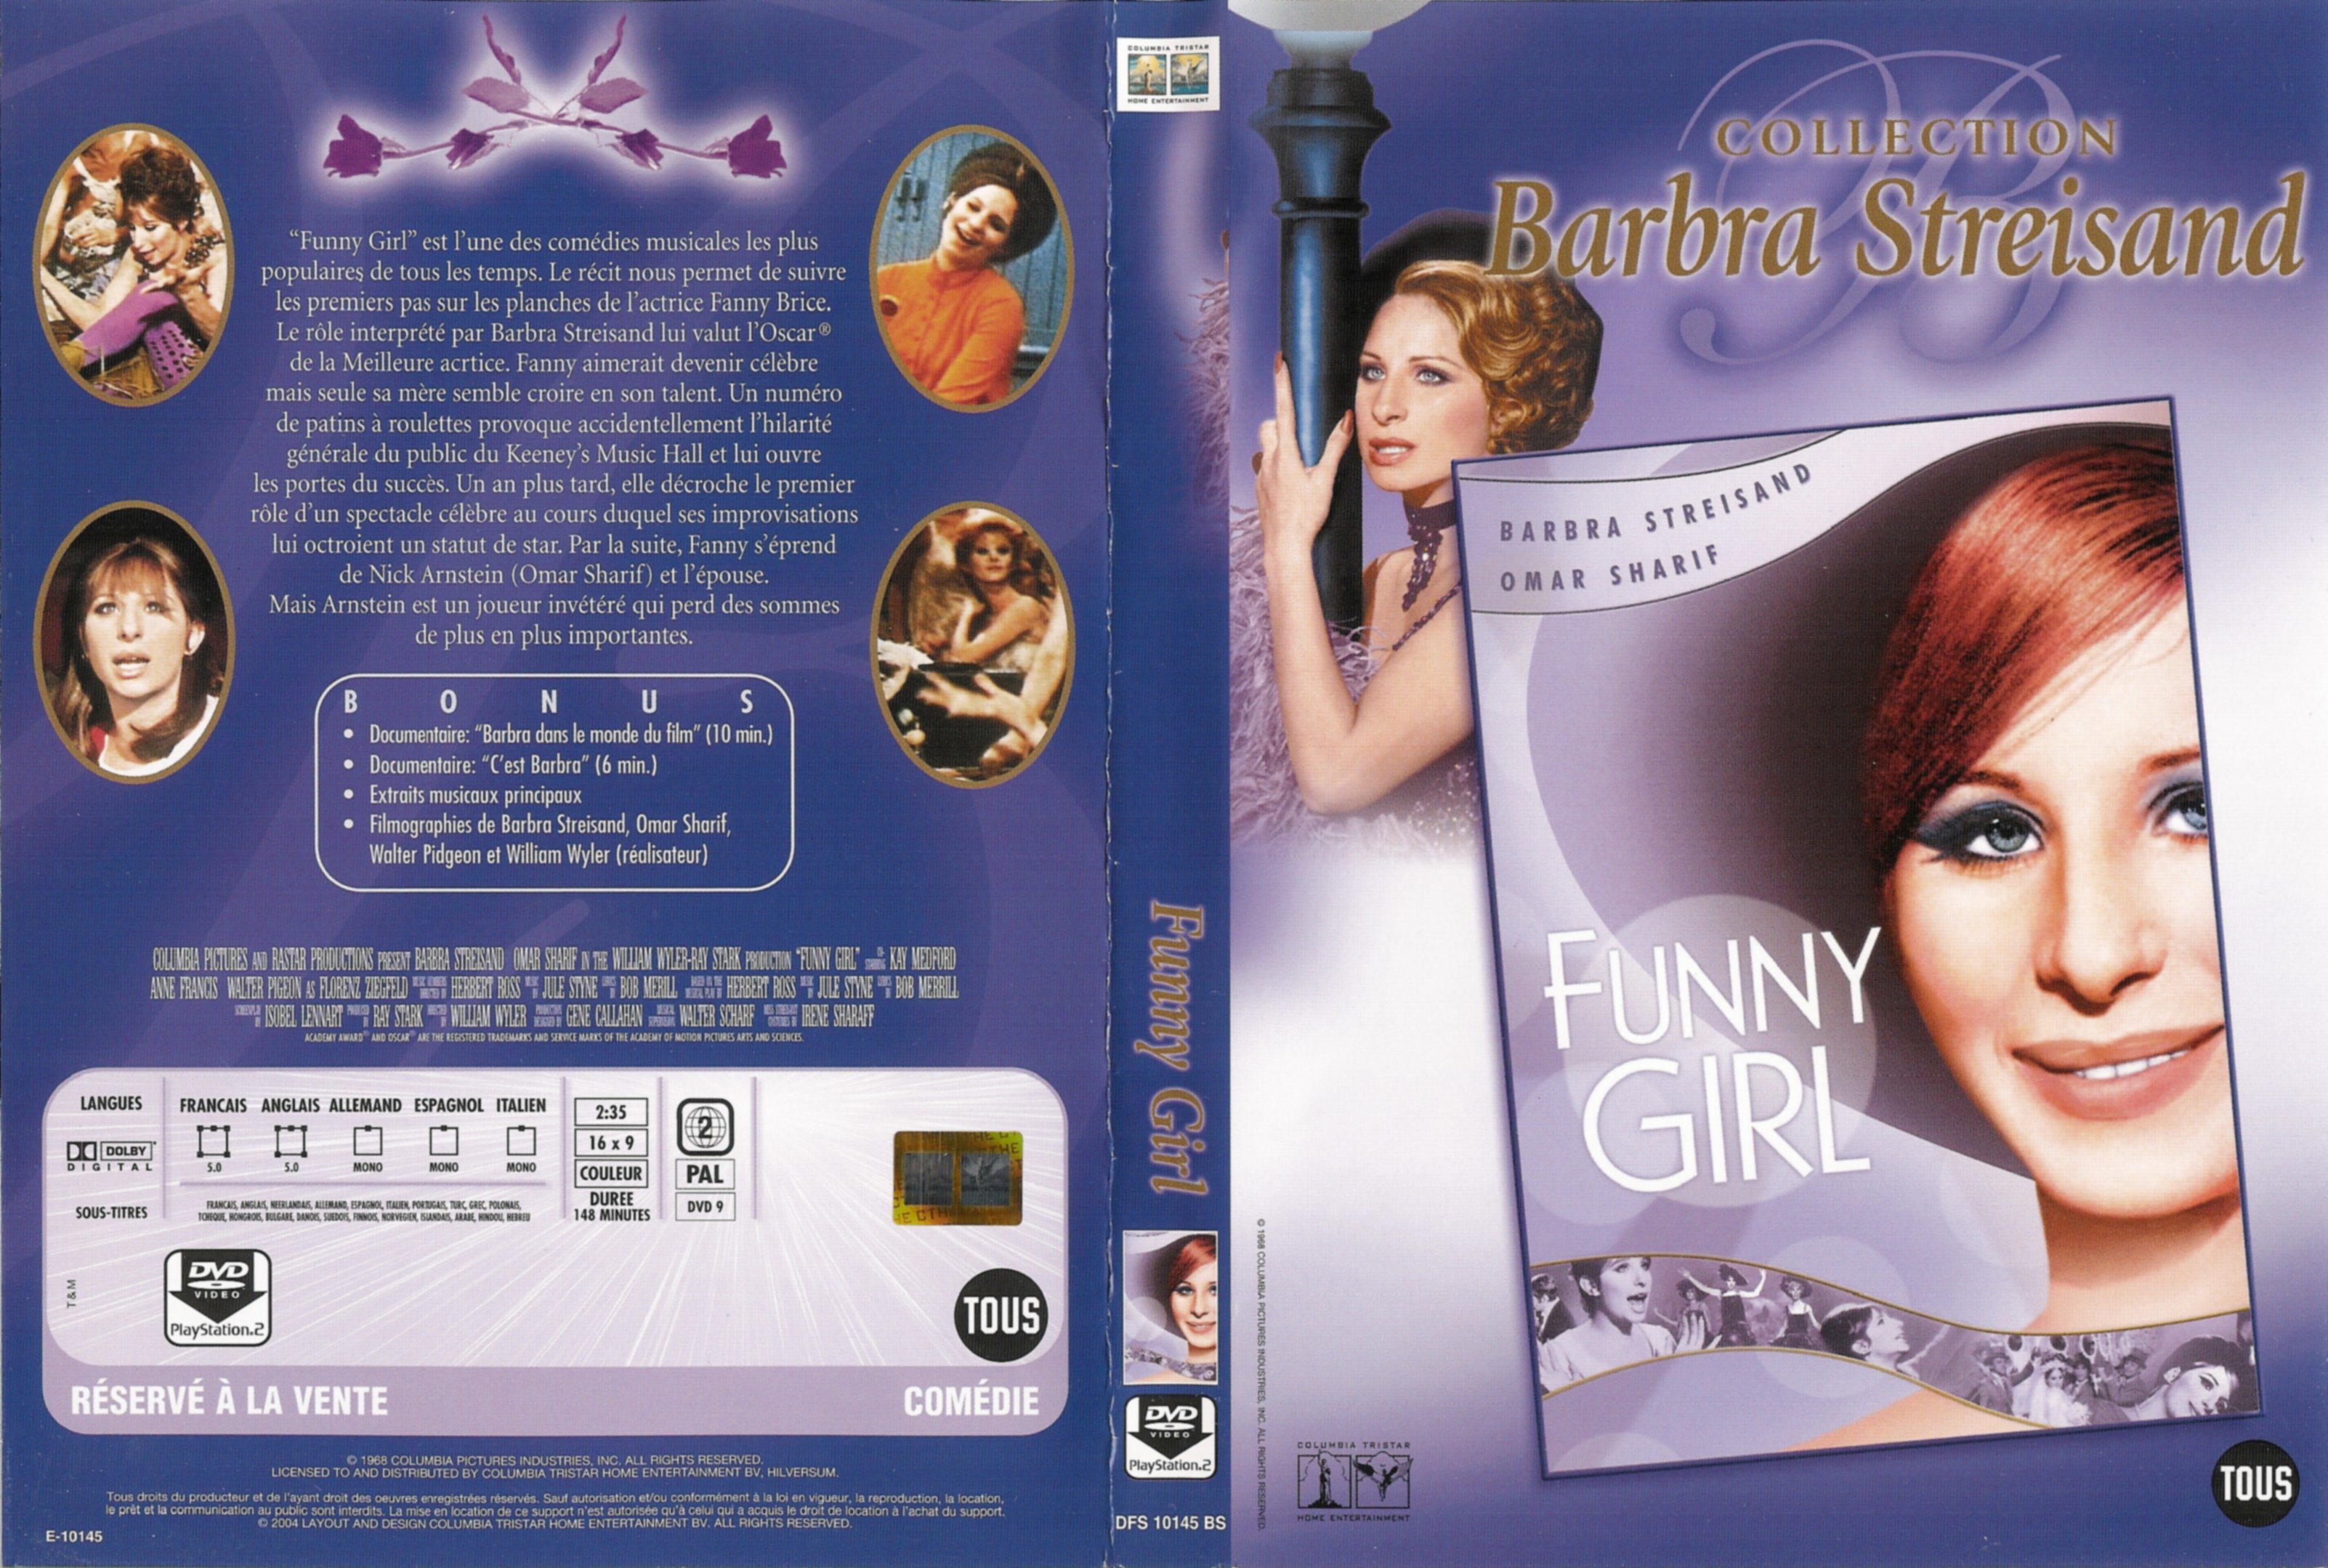 Jaquette DVD Funny girl